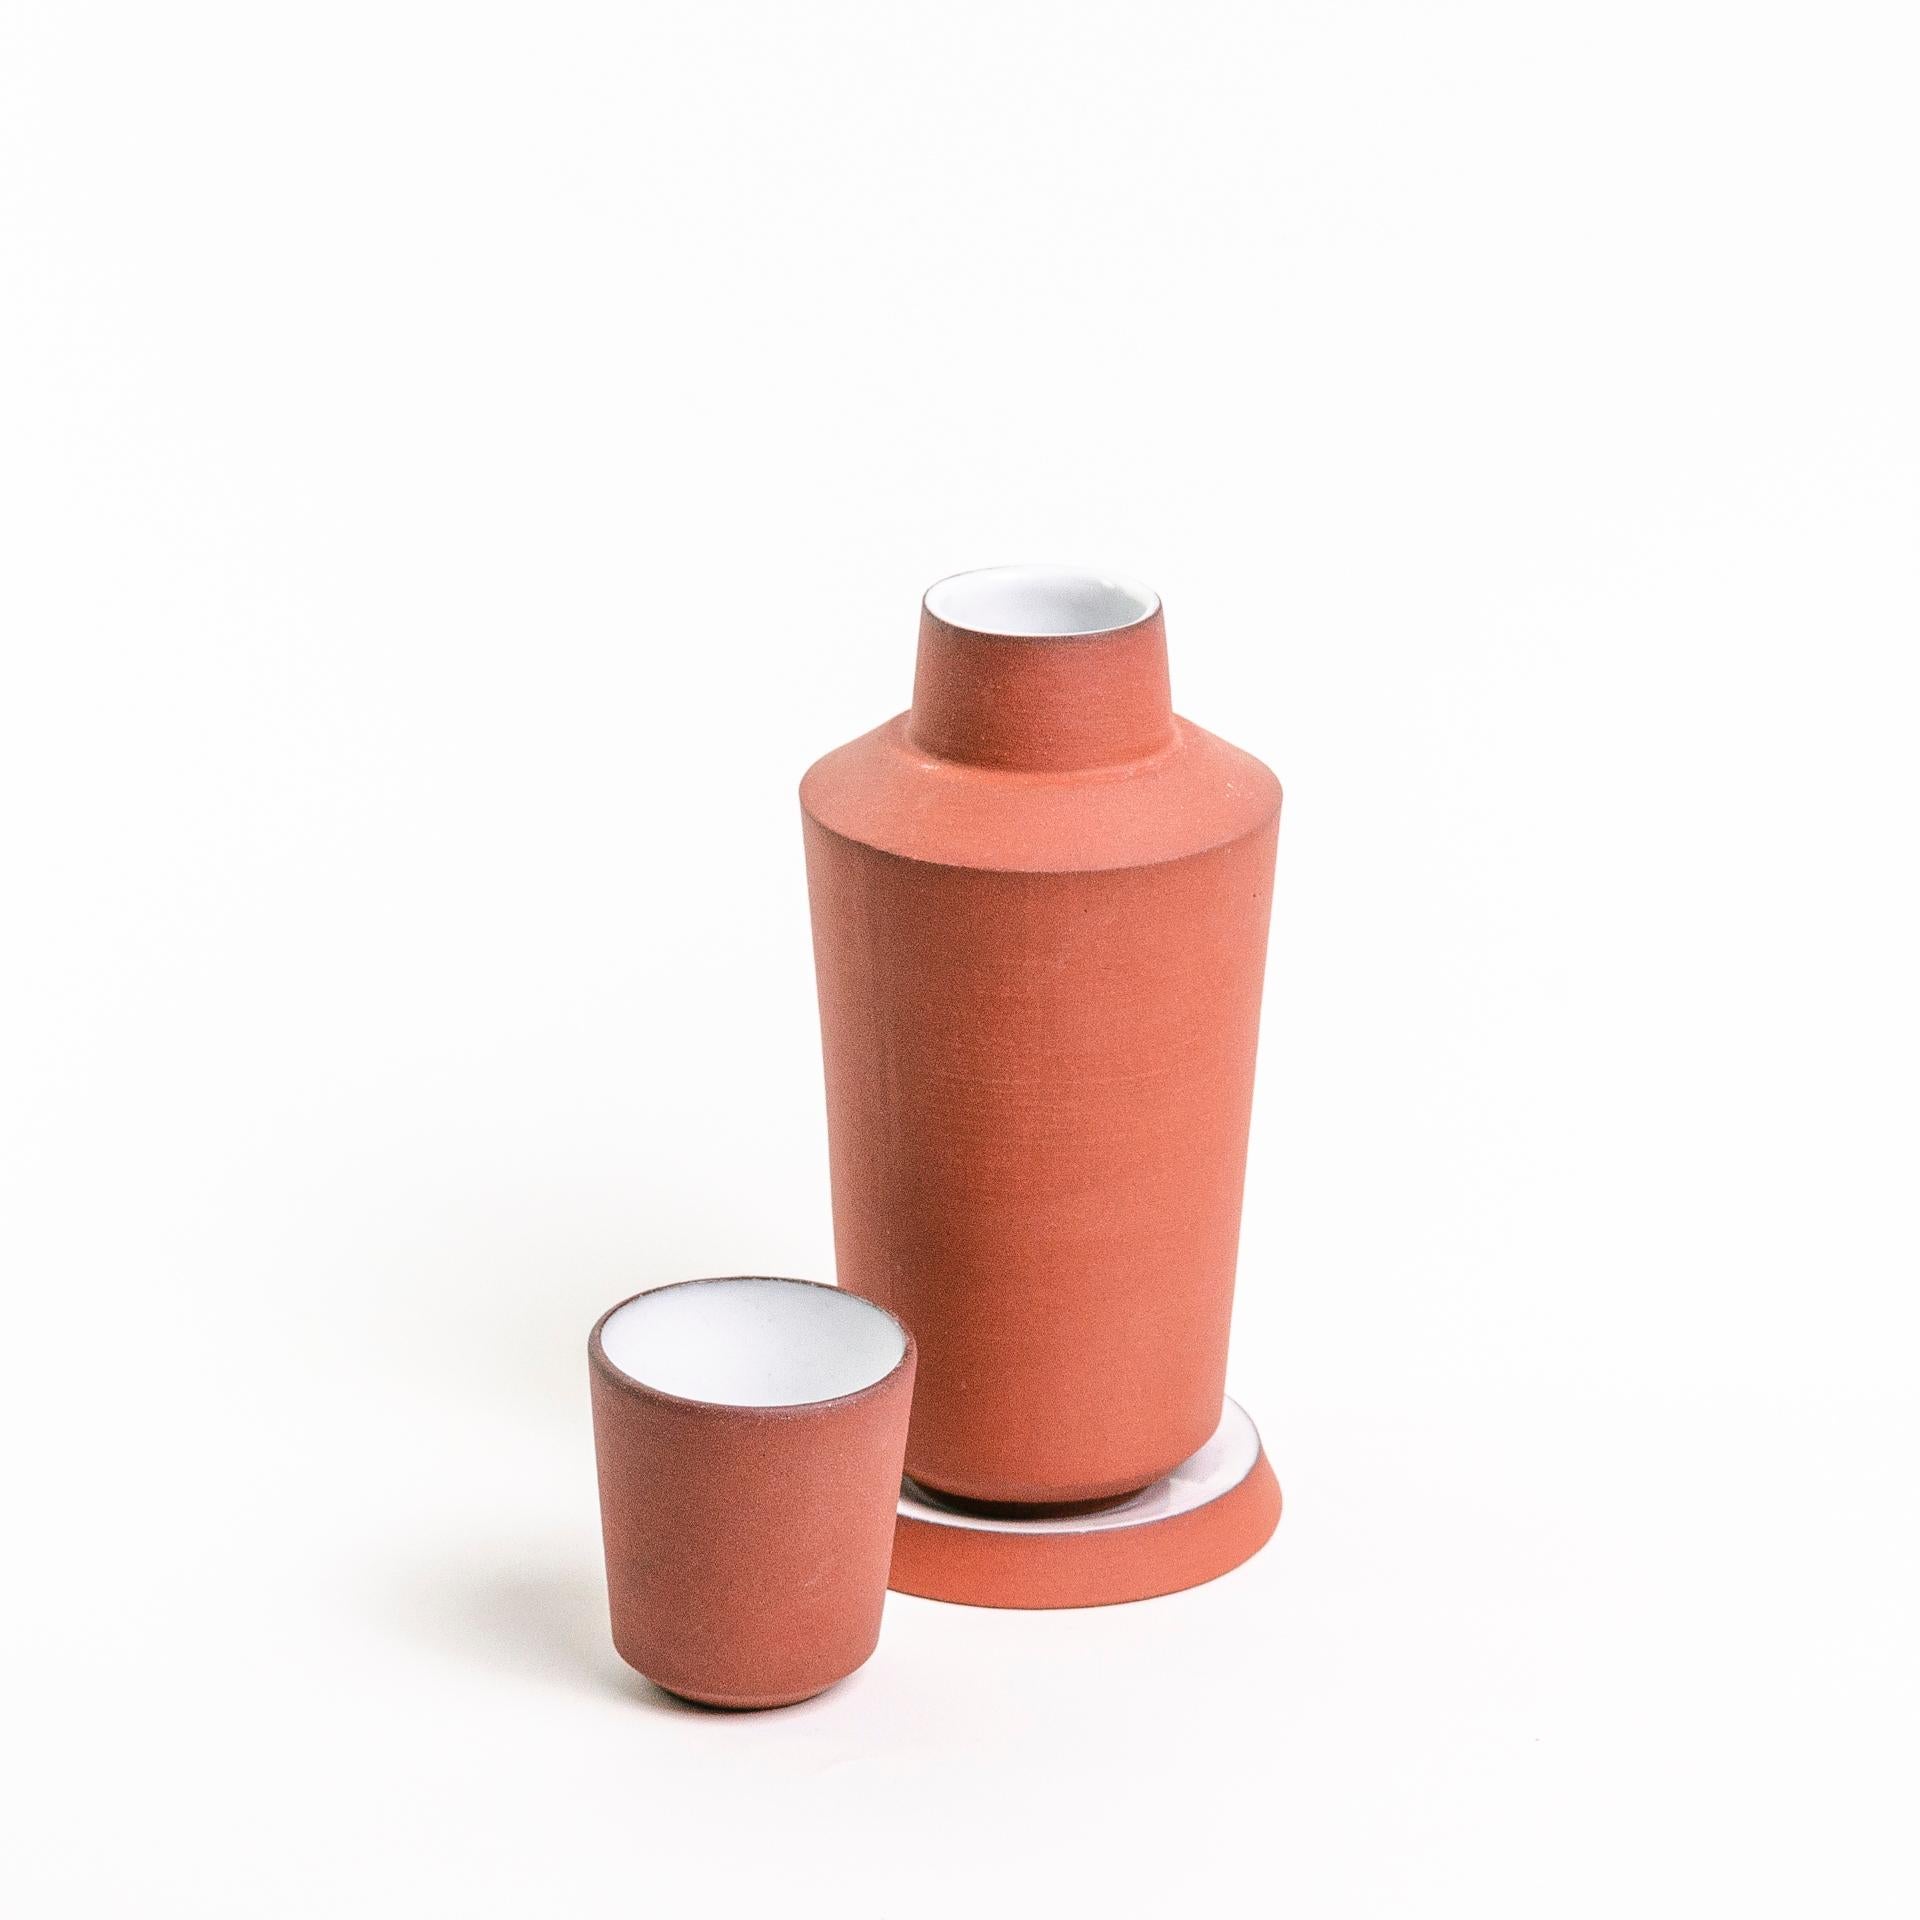 .This Water carafe keeps the water always fresh, to spend the day by your side or fuel your sleep so that it remains fluid and invigorating. 
- Capacity: 600ml 
- Materials and finishes: Terracotta fired at high temperature with glazed